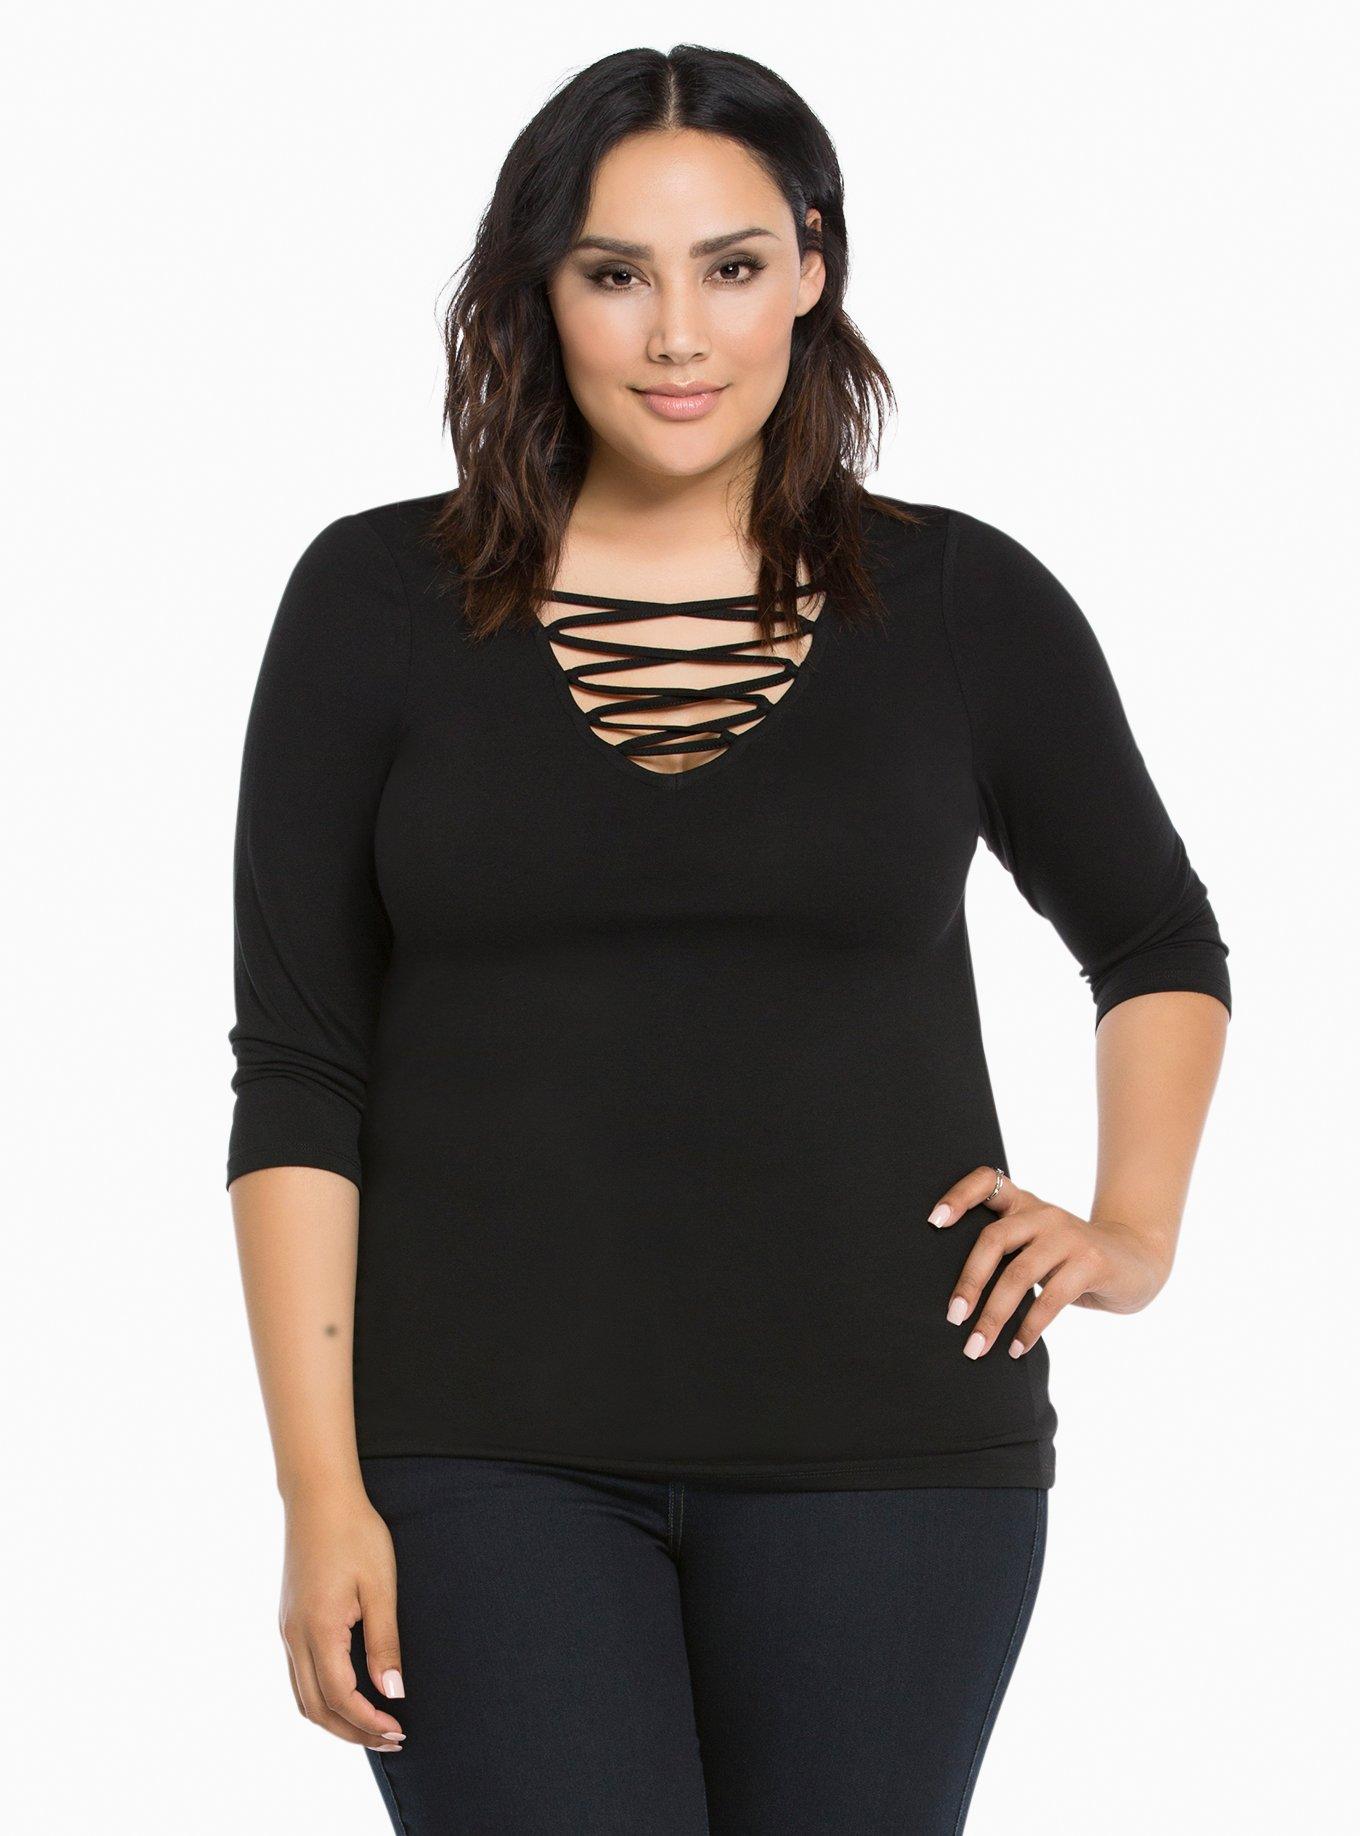 Plus Size Low-Cut Cleavage Wide Band V-Neck T-Shirt Short Sleeve Tee Top